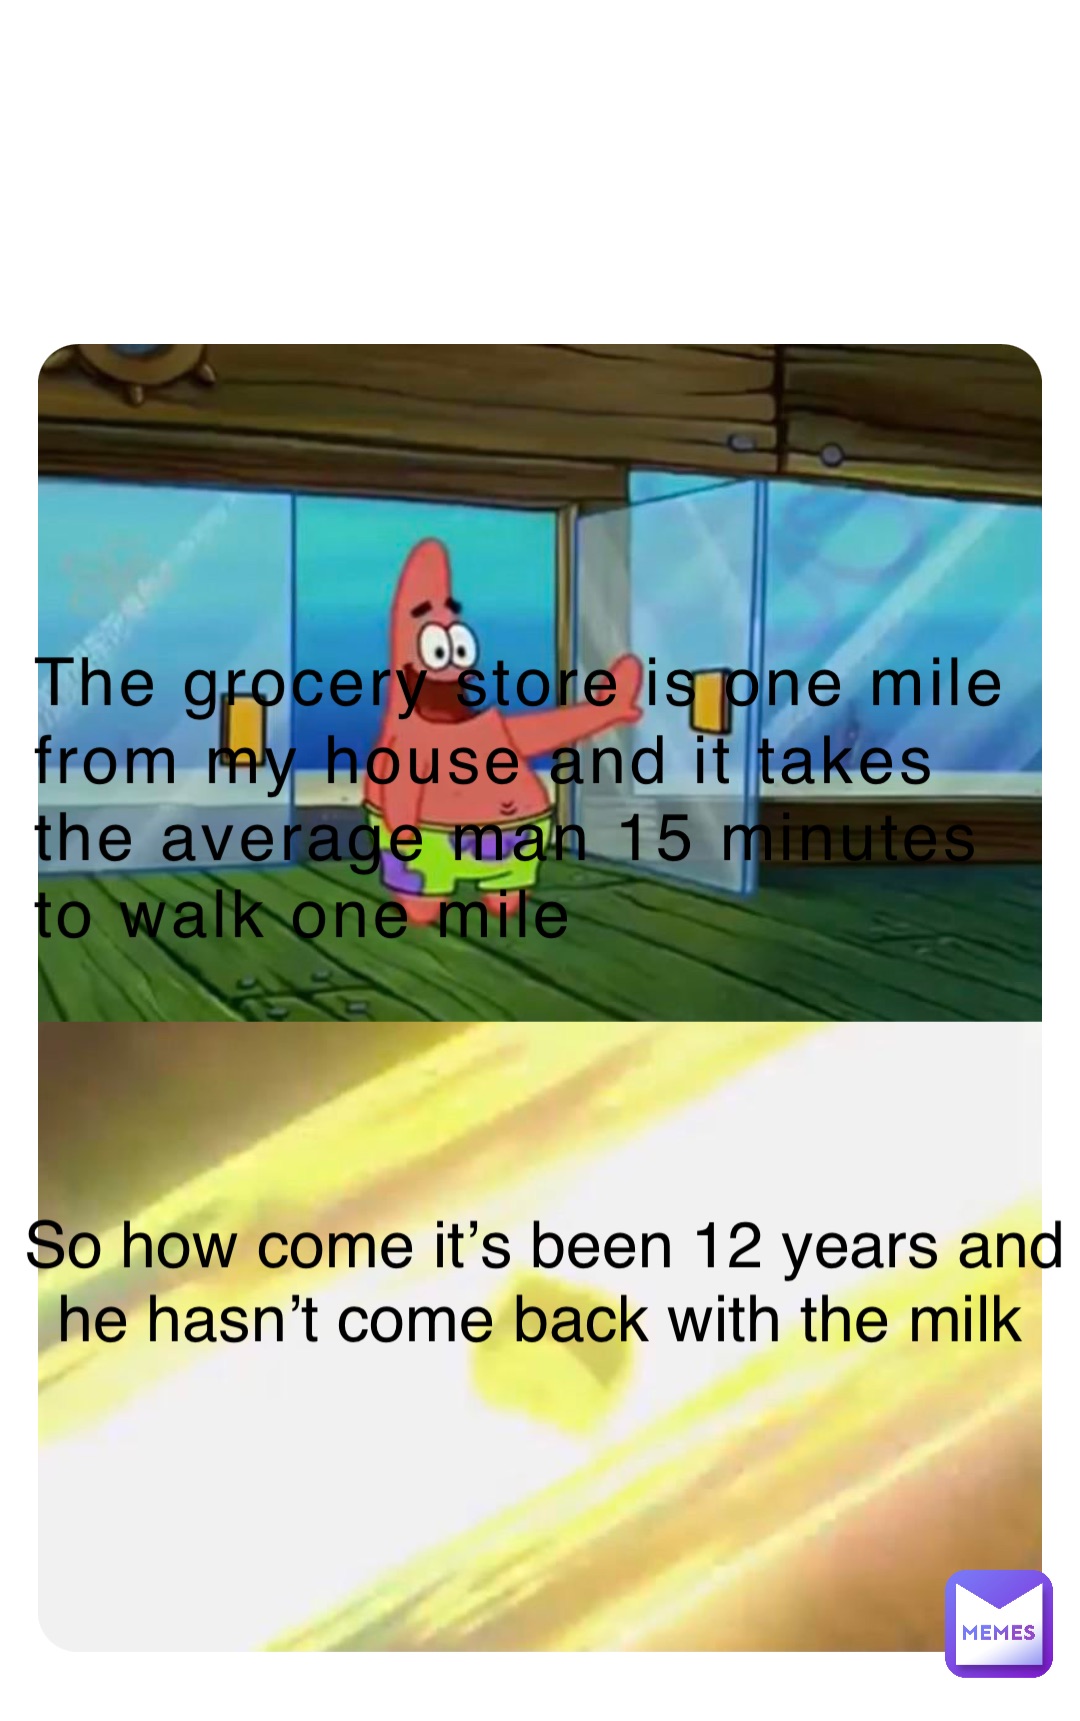 The grocery store is one mile from my house and it takes the average man 15 minutes to walk one mile So how come it’s been 12 years and he hasn’t come back with the milk